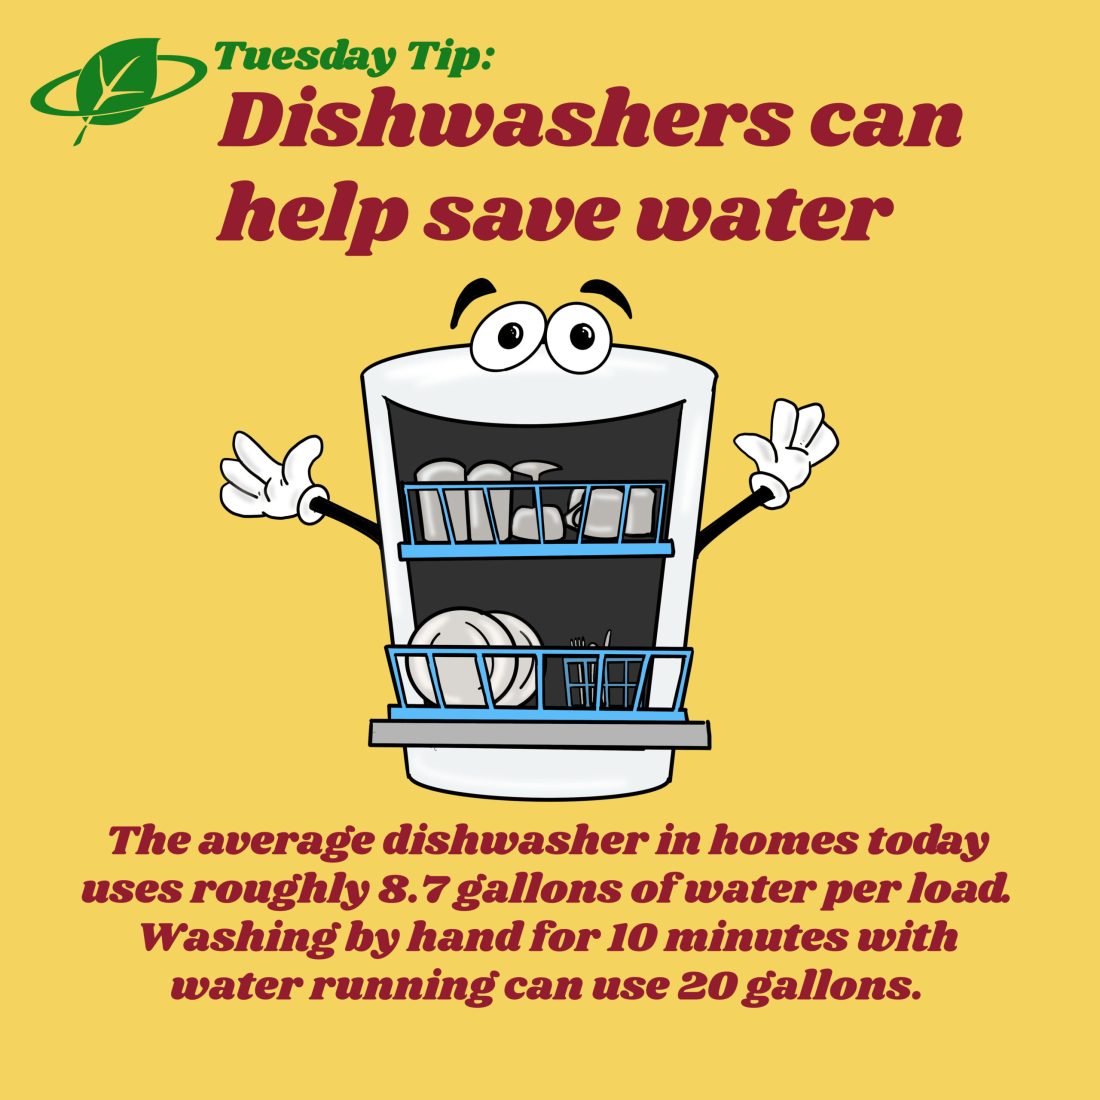 Dishwashers can help save water | Tuesday Tip